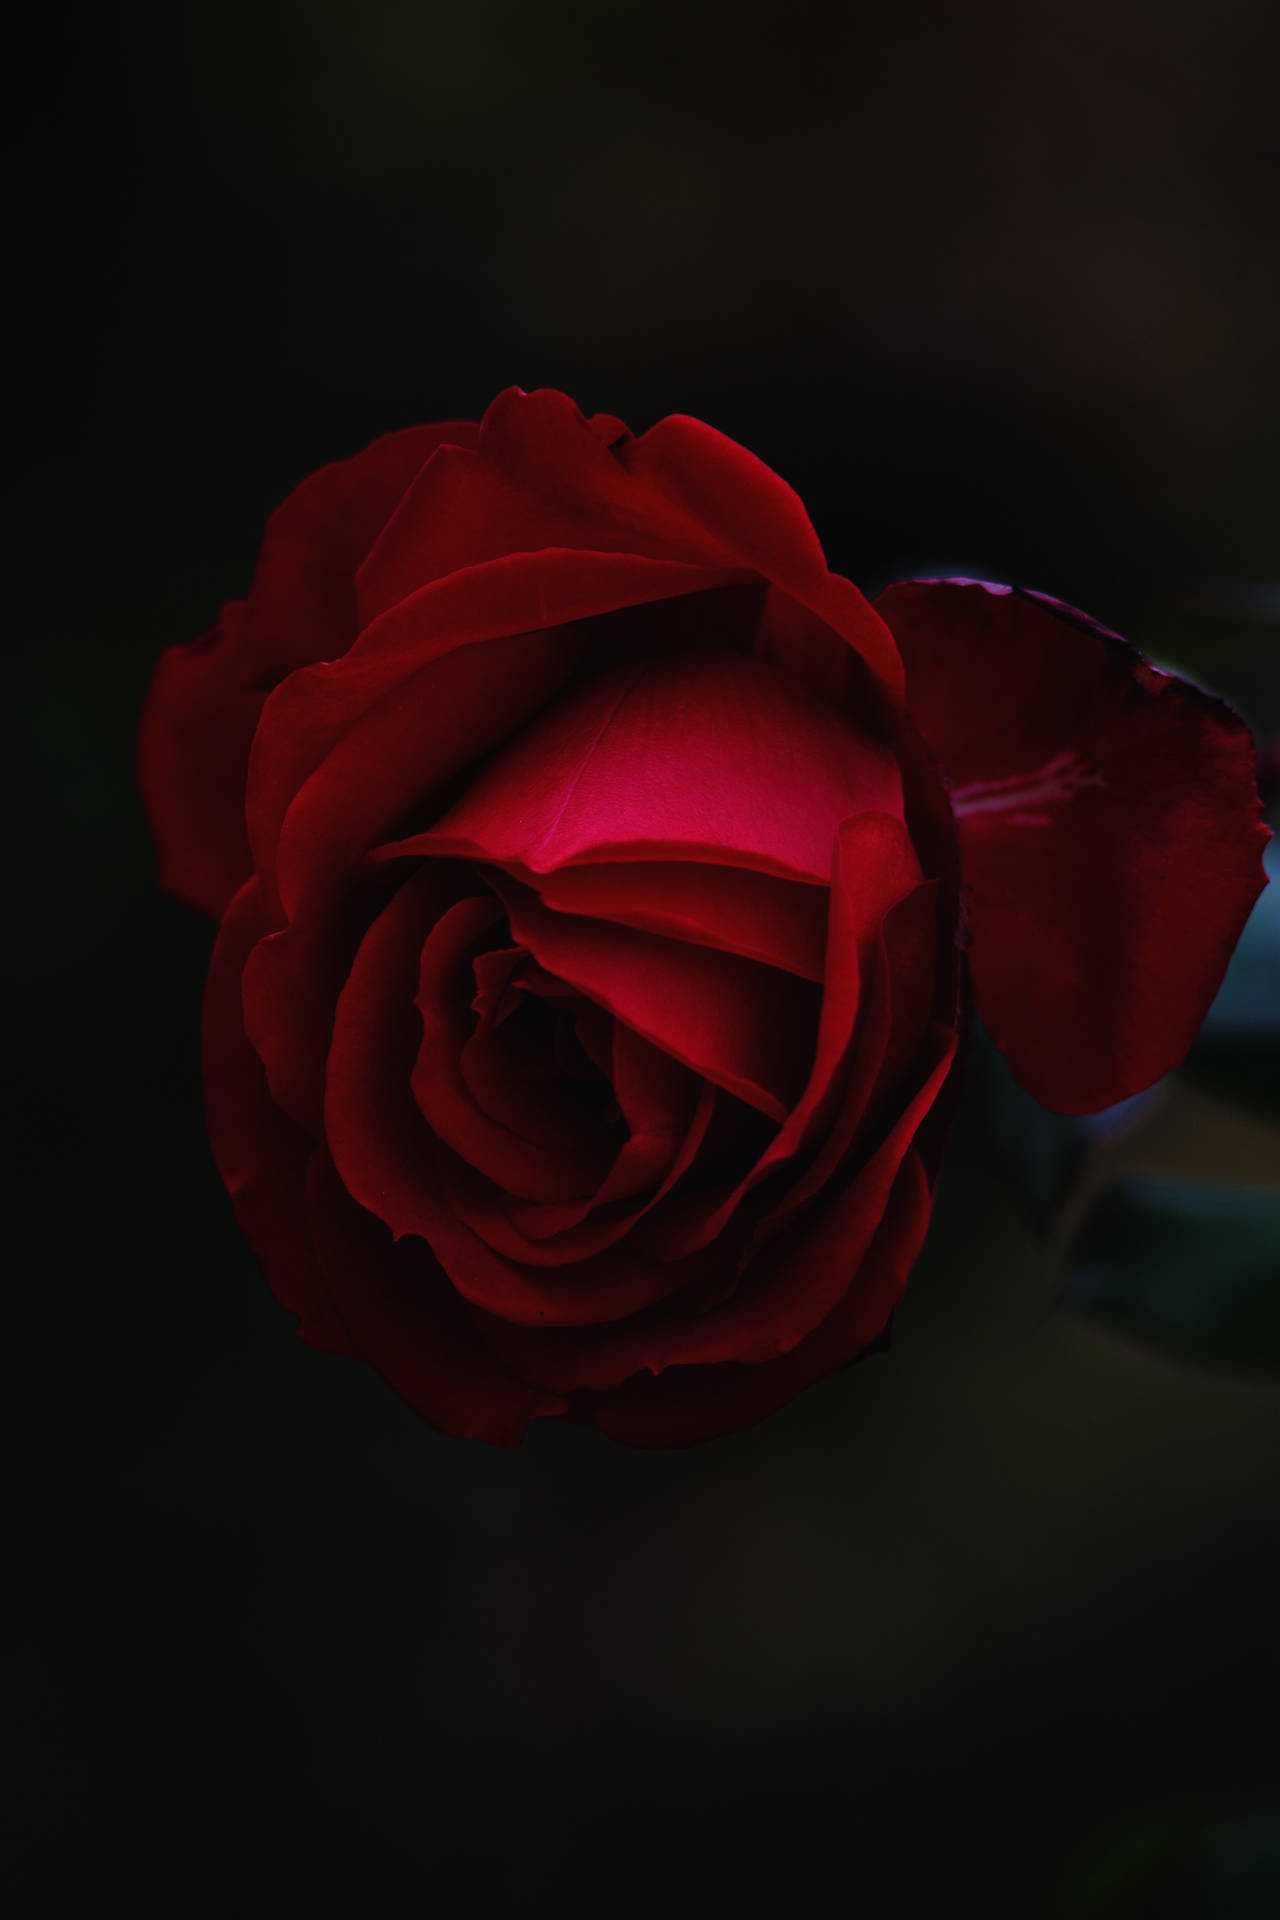 A Red Rose Is Shown In The Dark Background